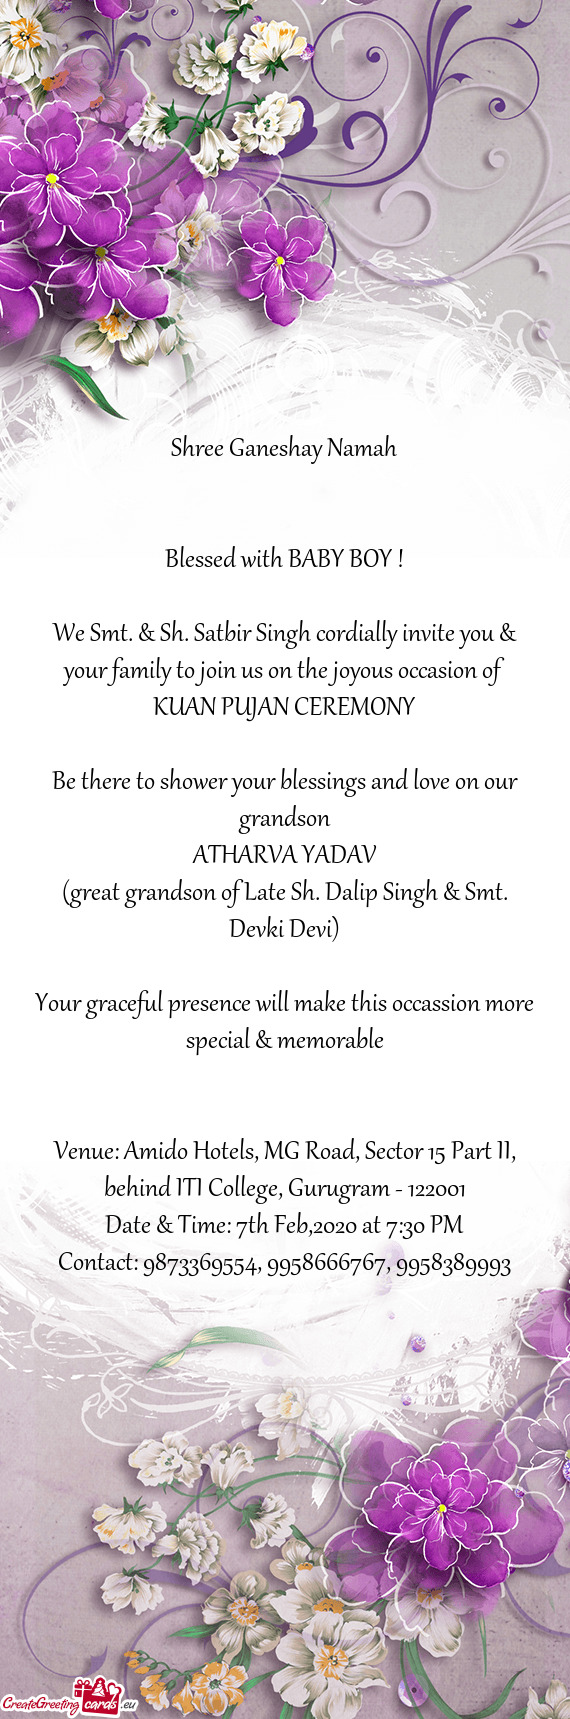 We Smt. & Sh. Satbir Singh cordially invite you & your family to join us on the joyous occasion of